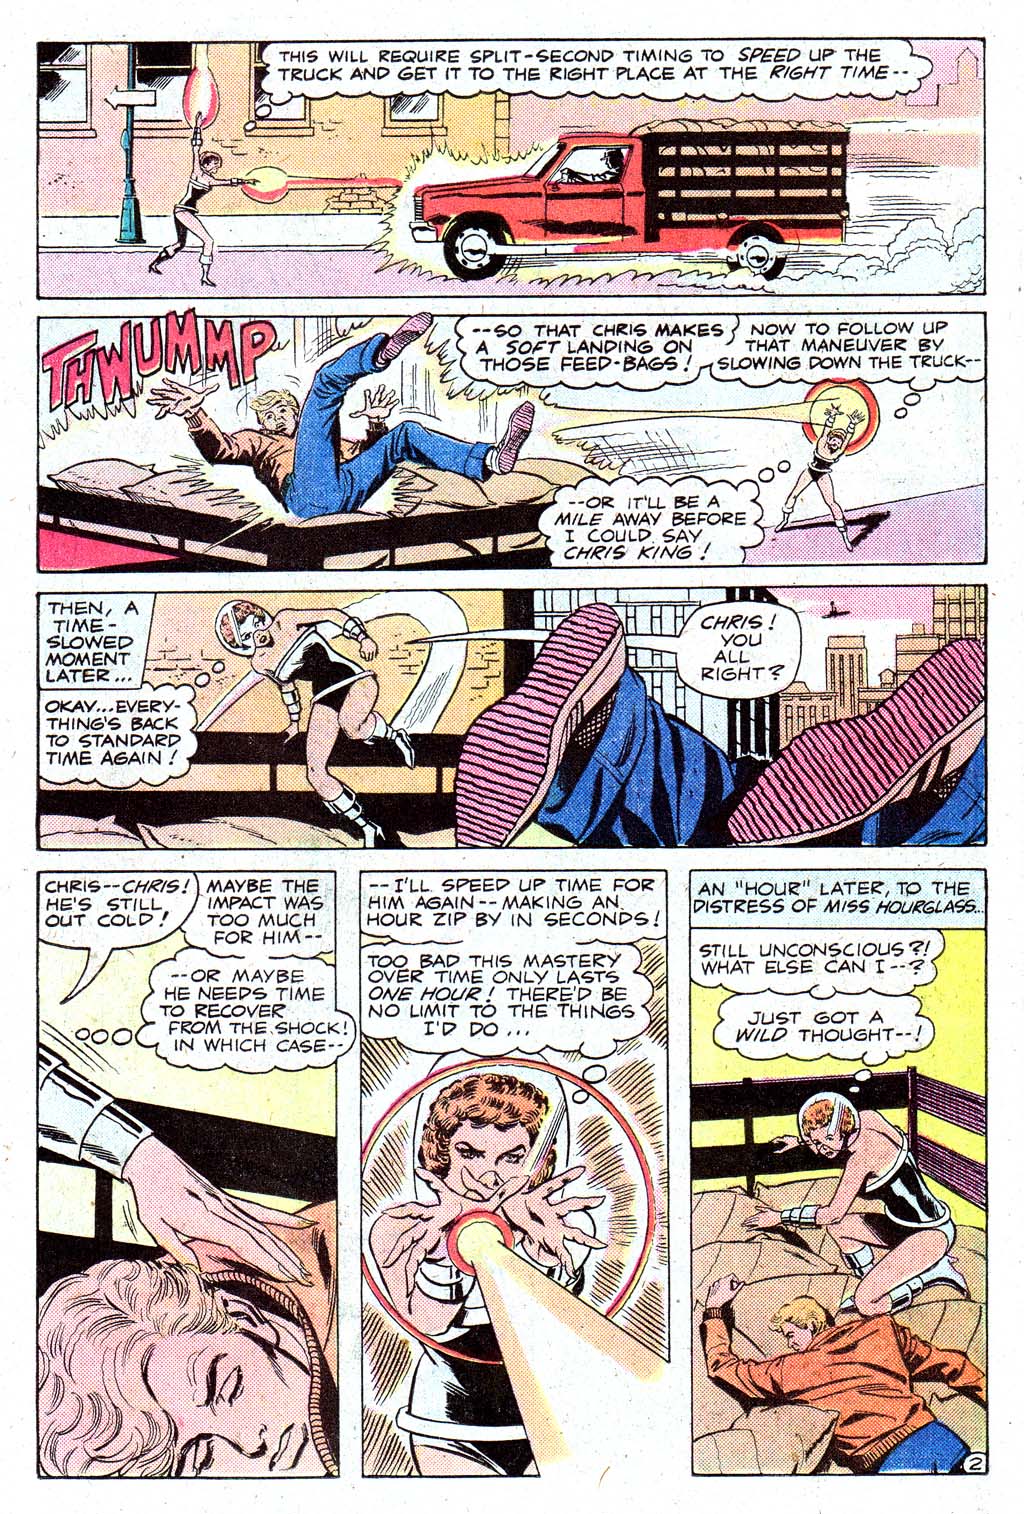 The New Adventures of Superboy 30 Page 25